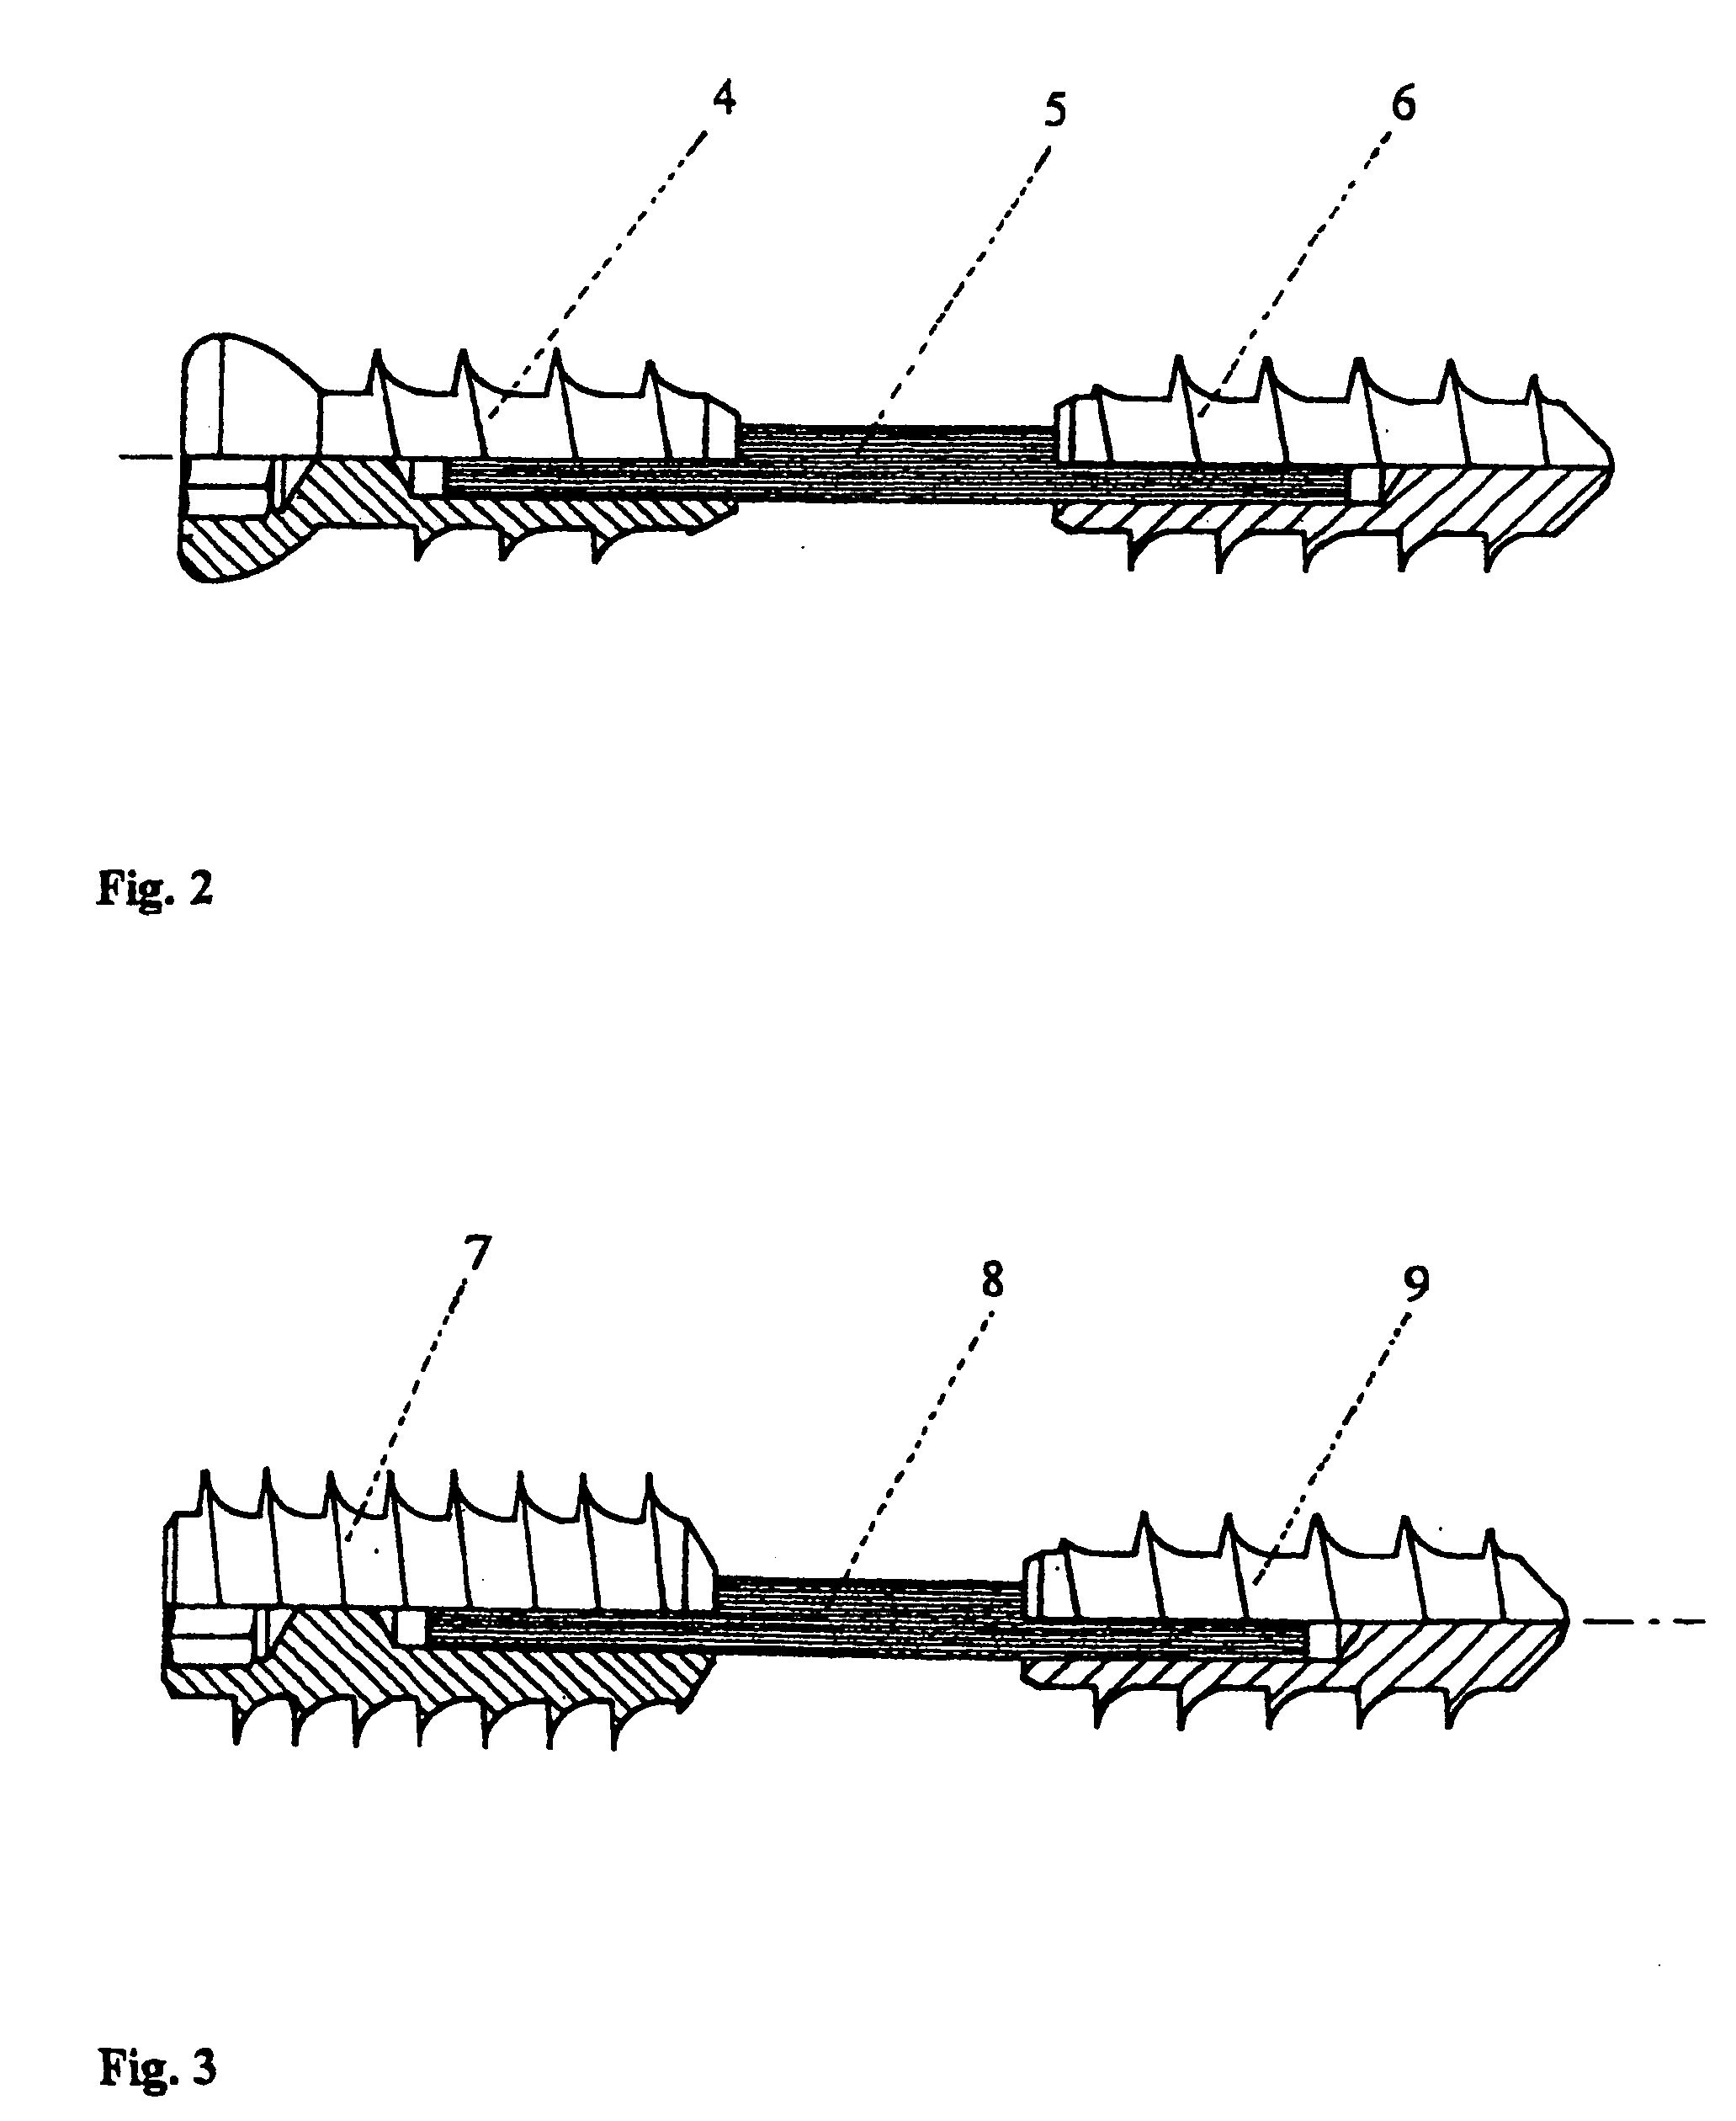 Implantable screw for stabilization of a joint or a bone fracture